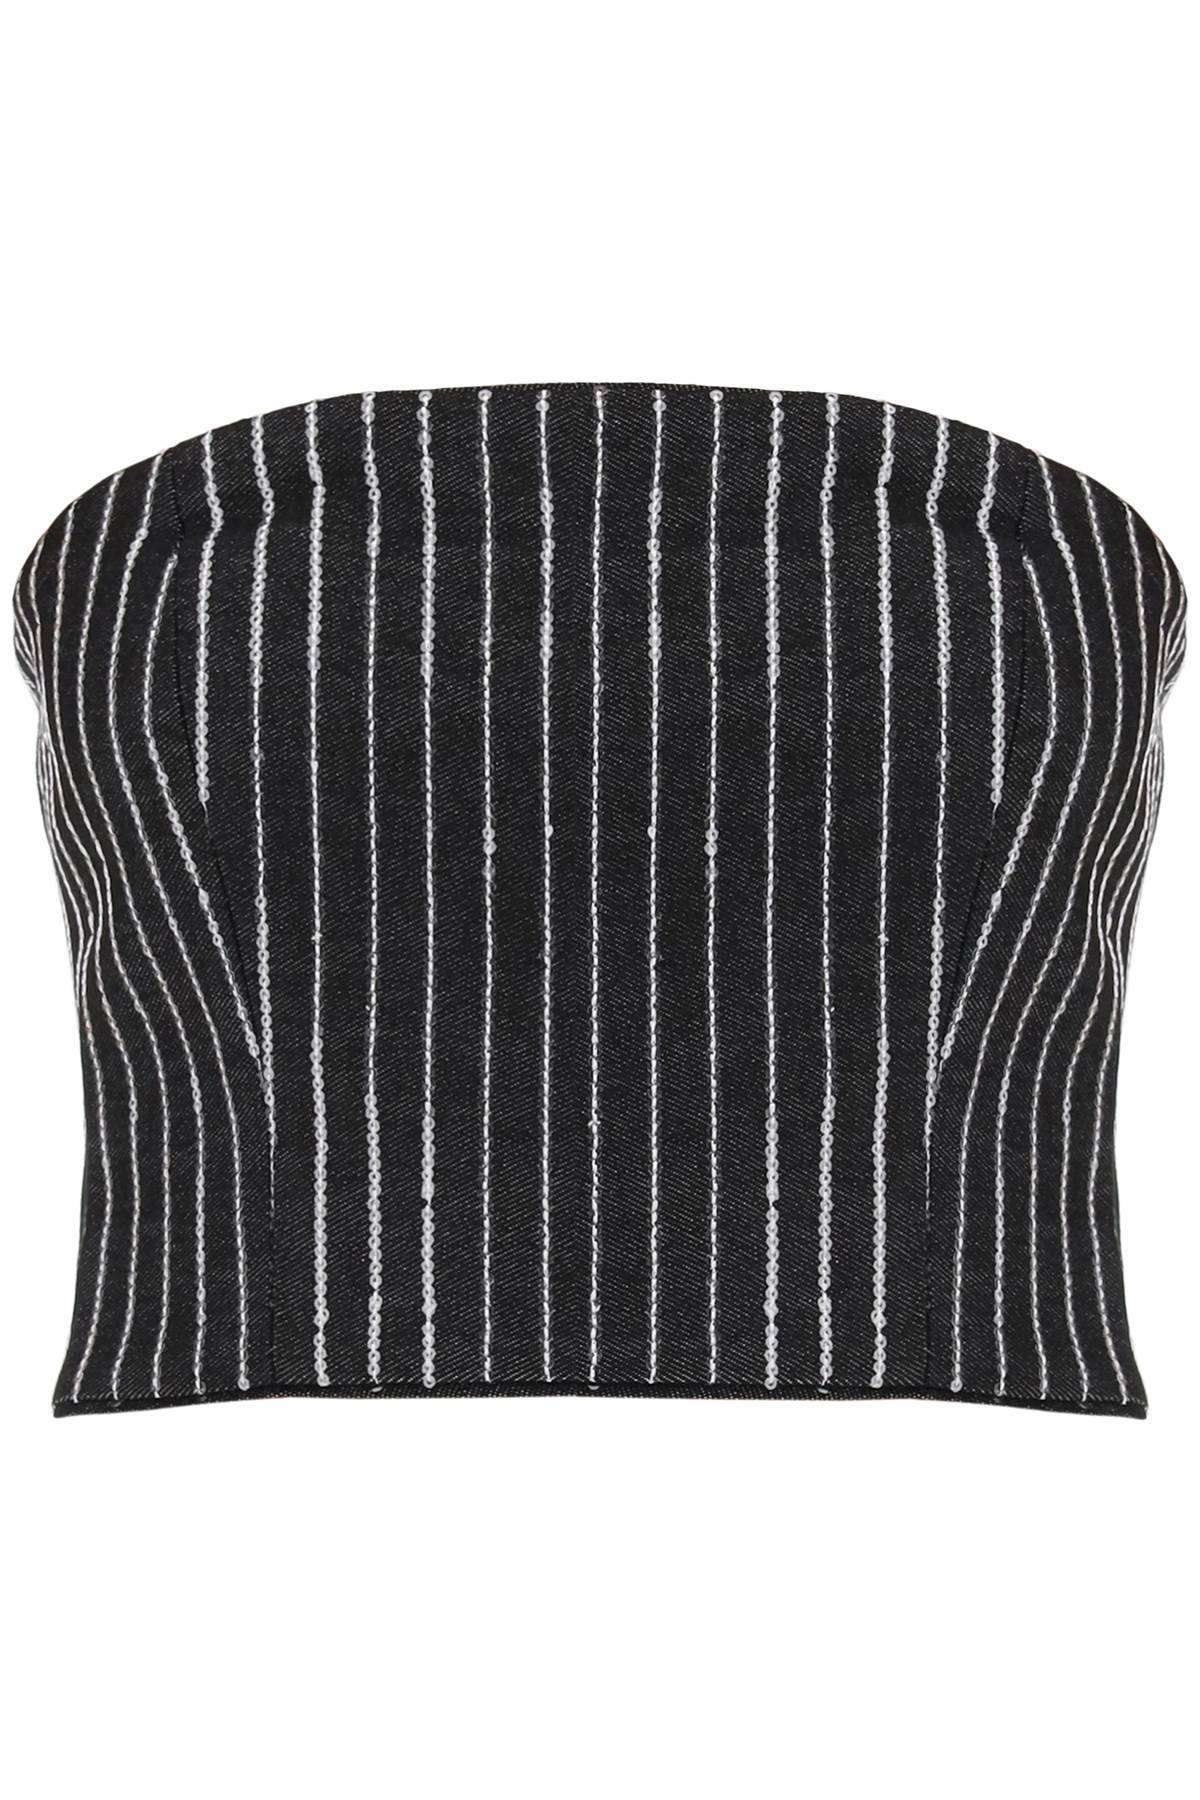 Rotate ROTATE cropped top with sequined stripes